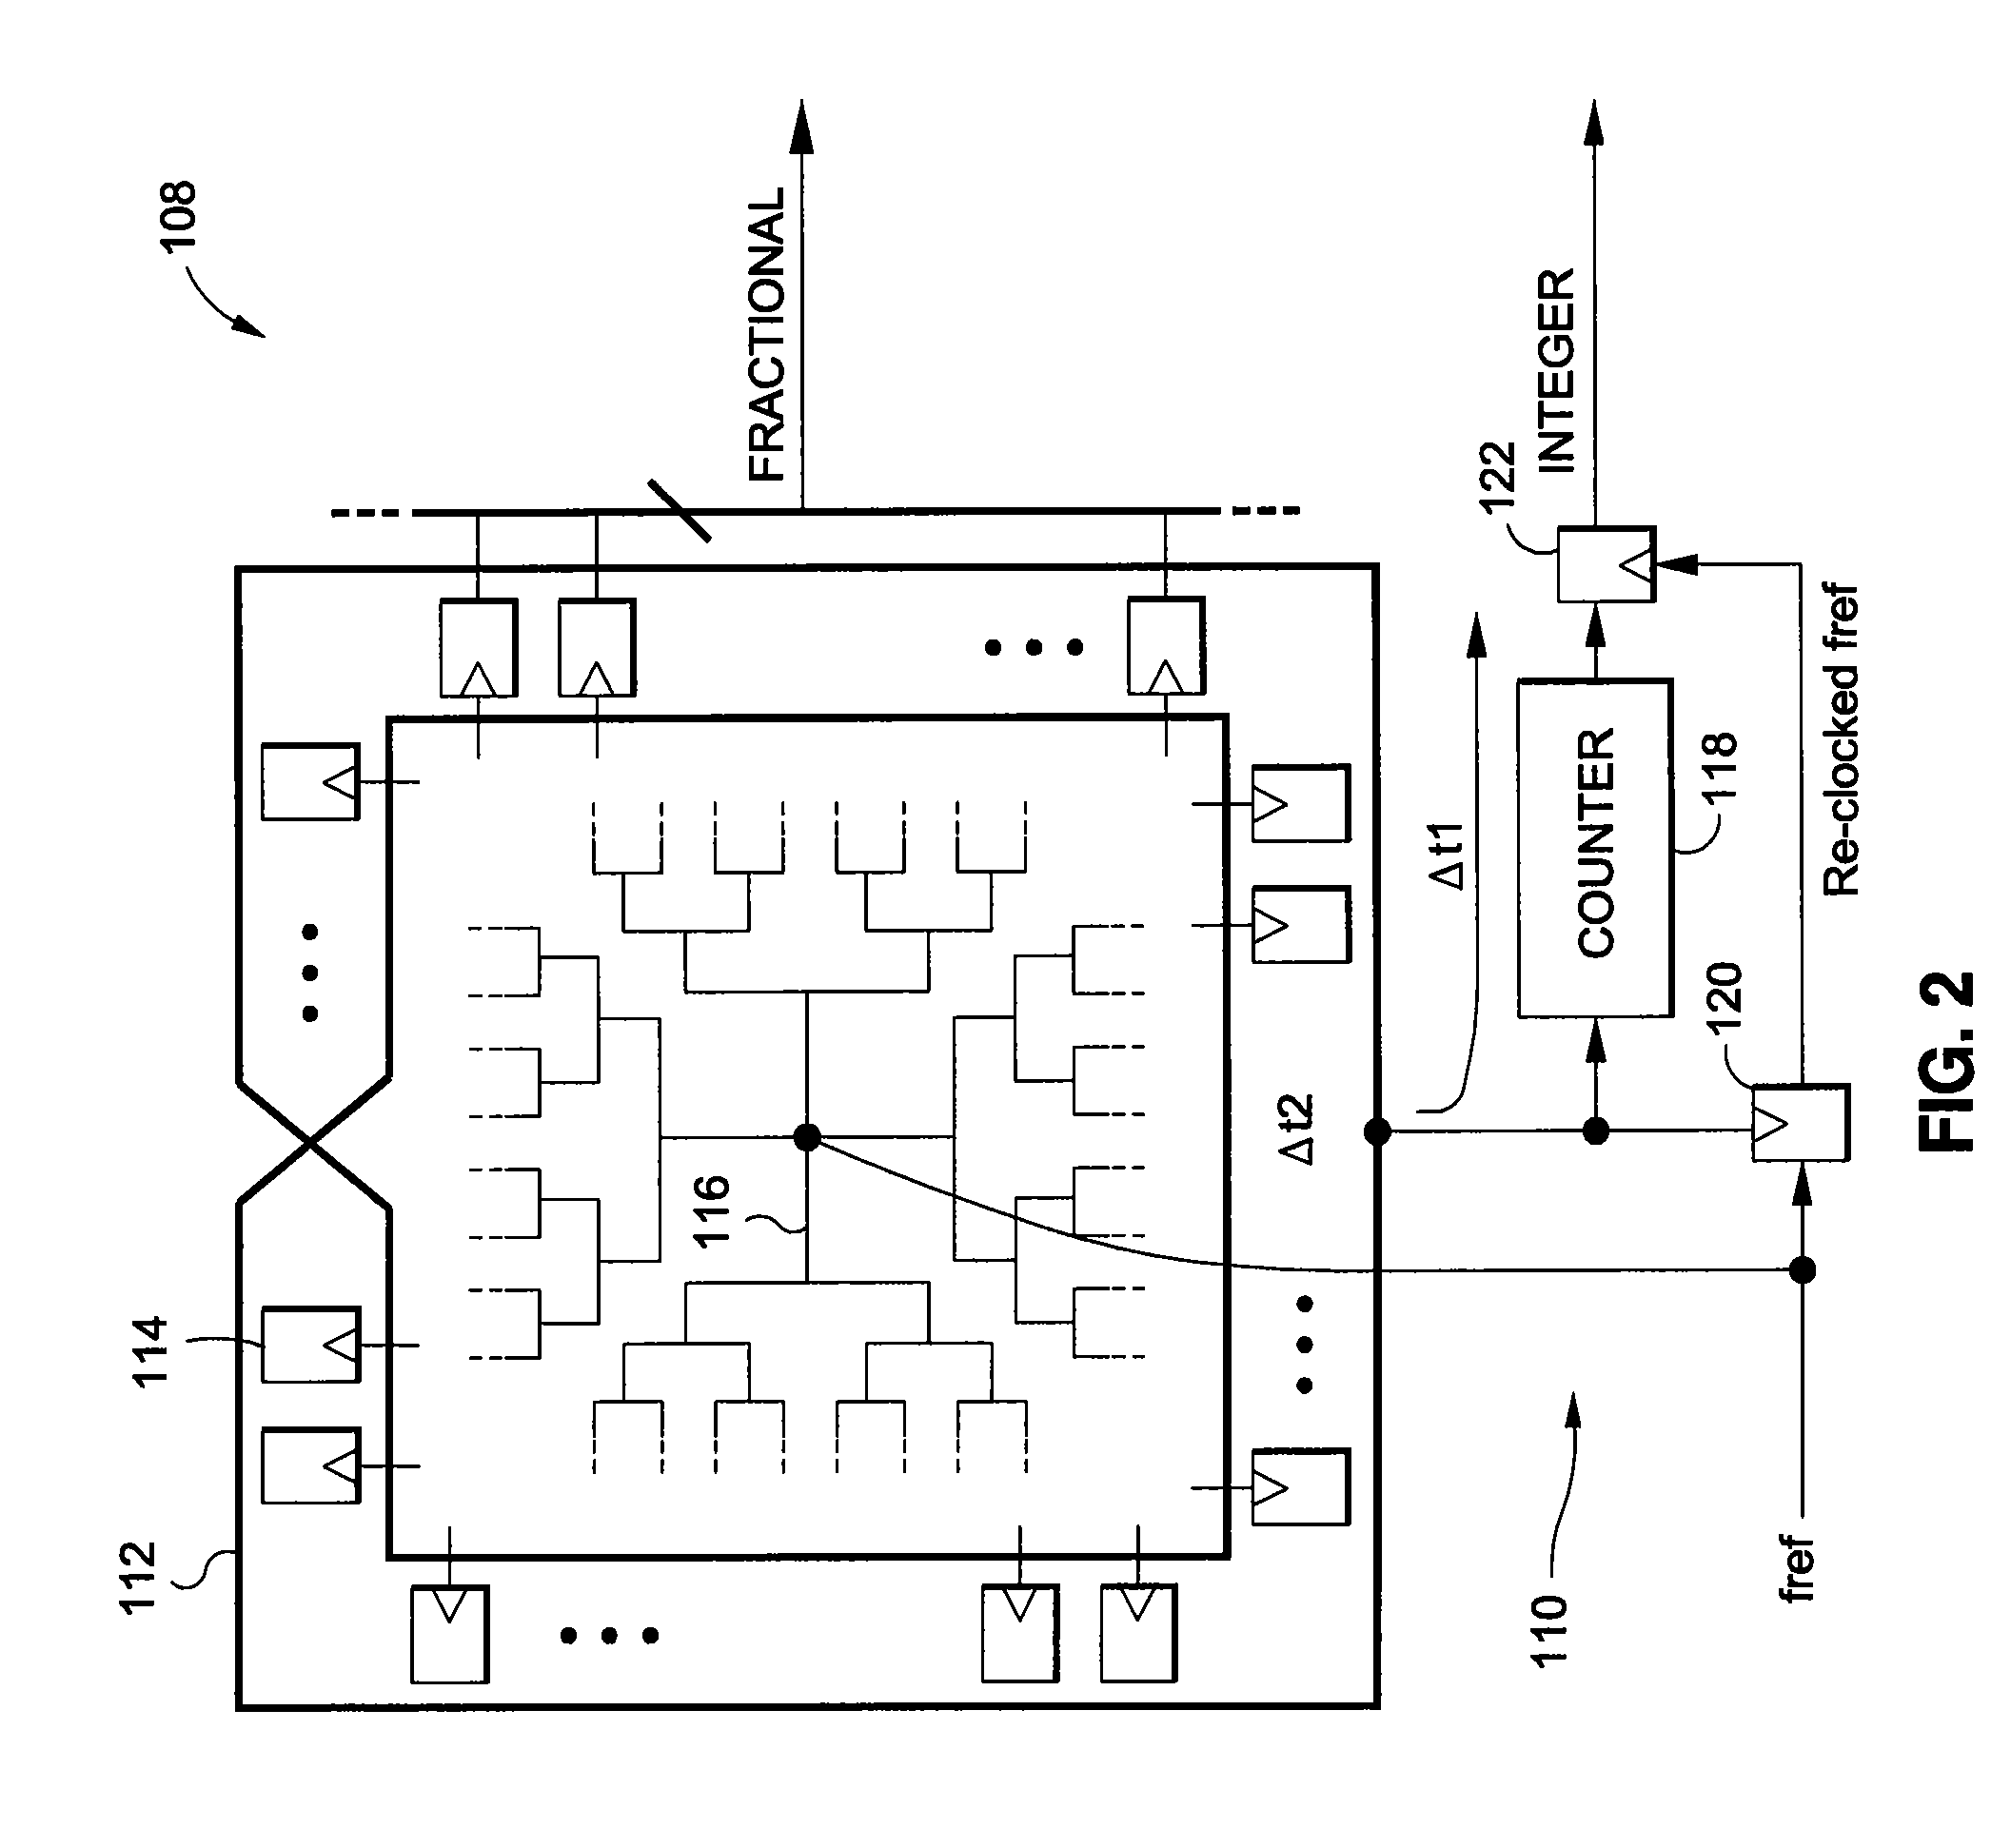 Method and system for a glitch correction in an all digital phase lock loop